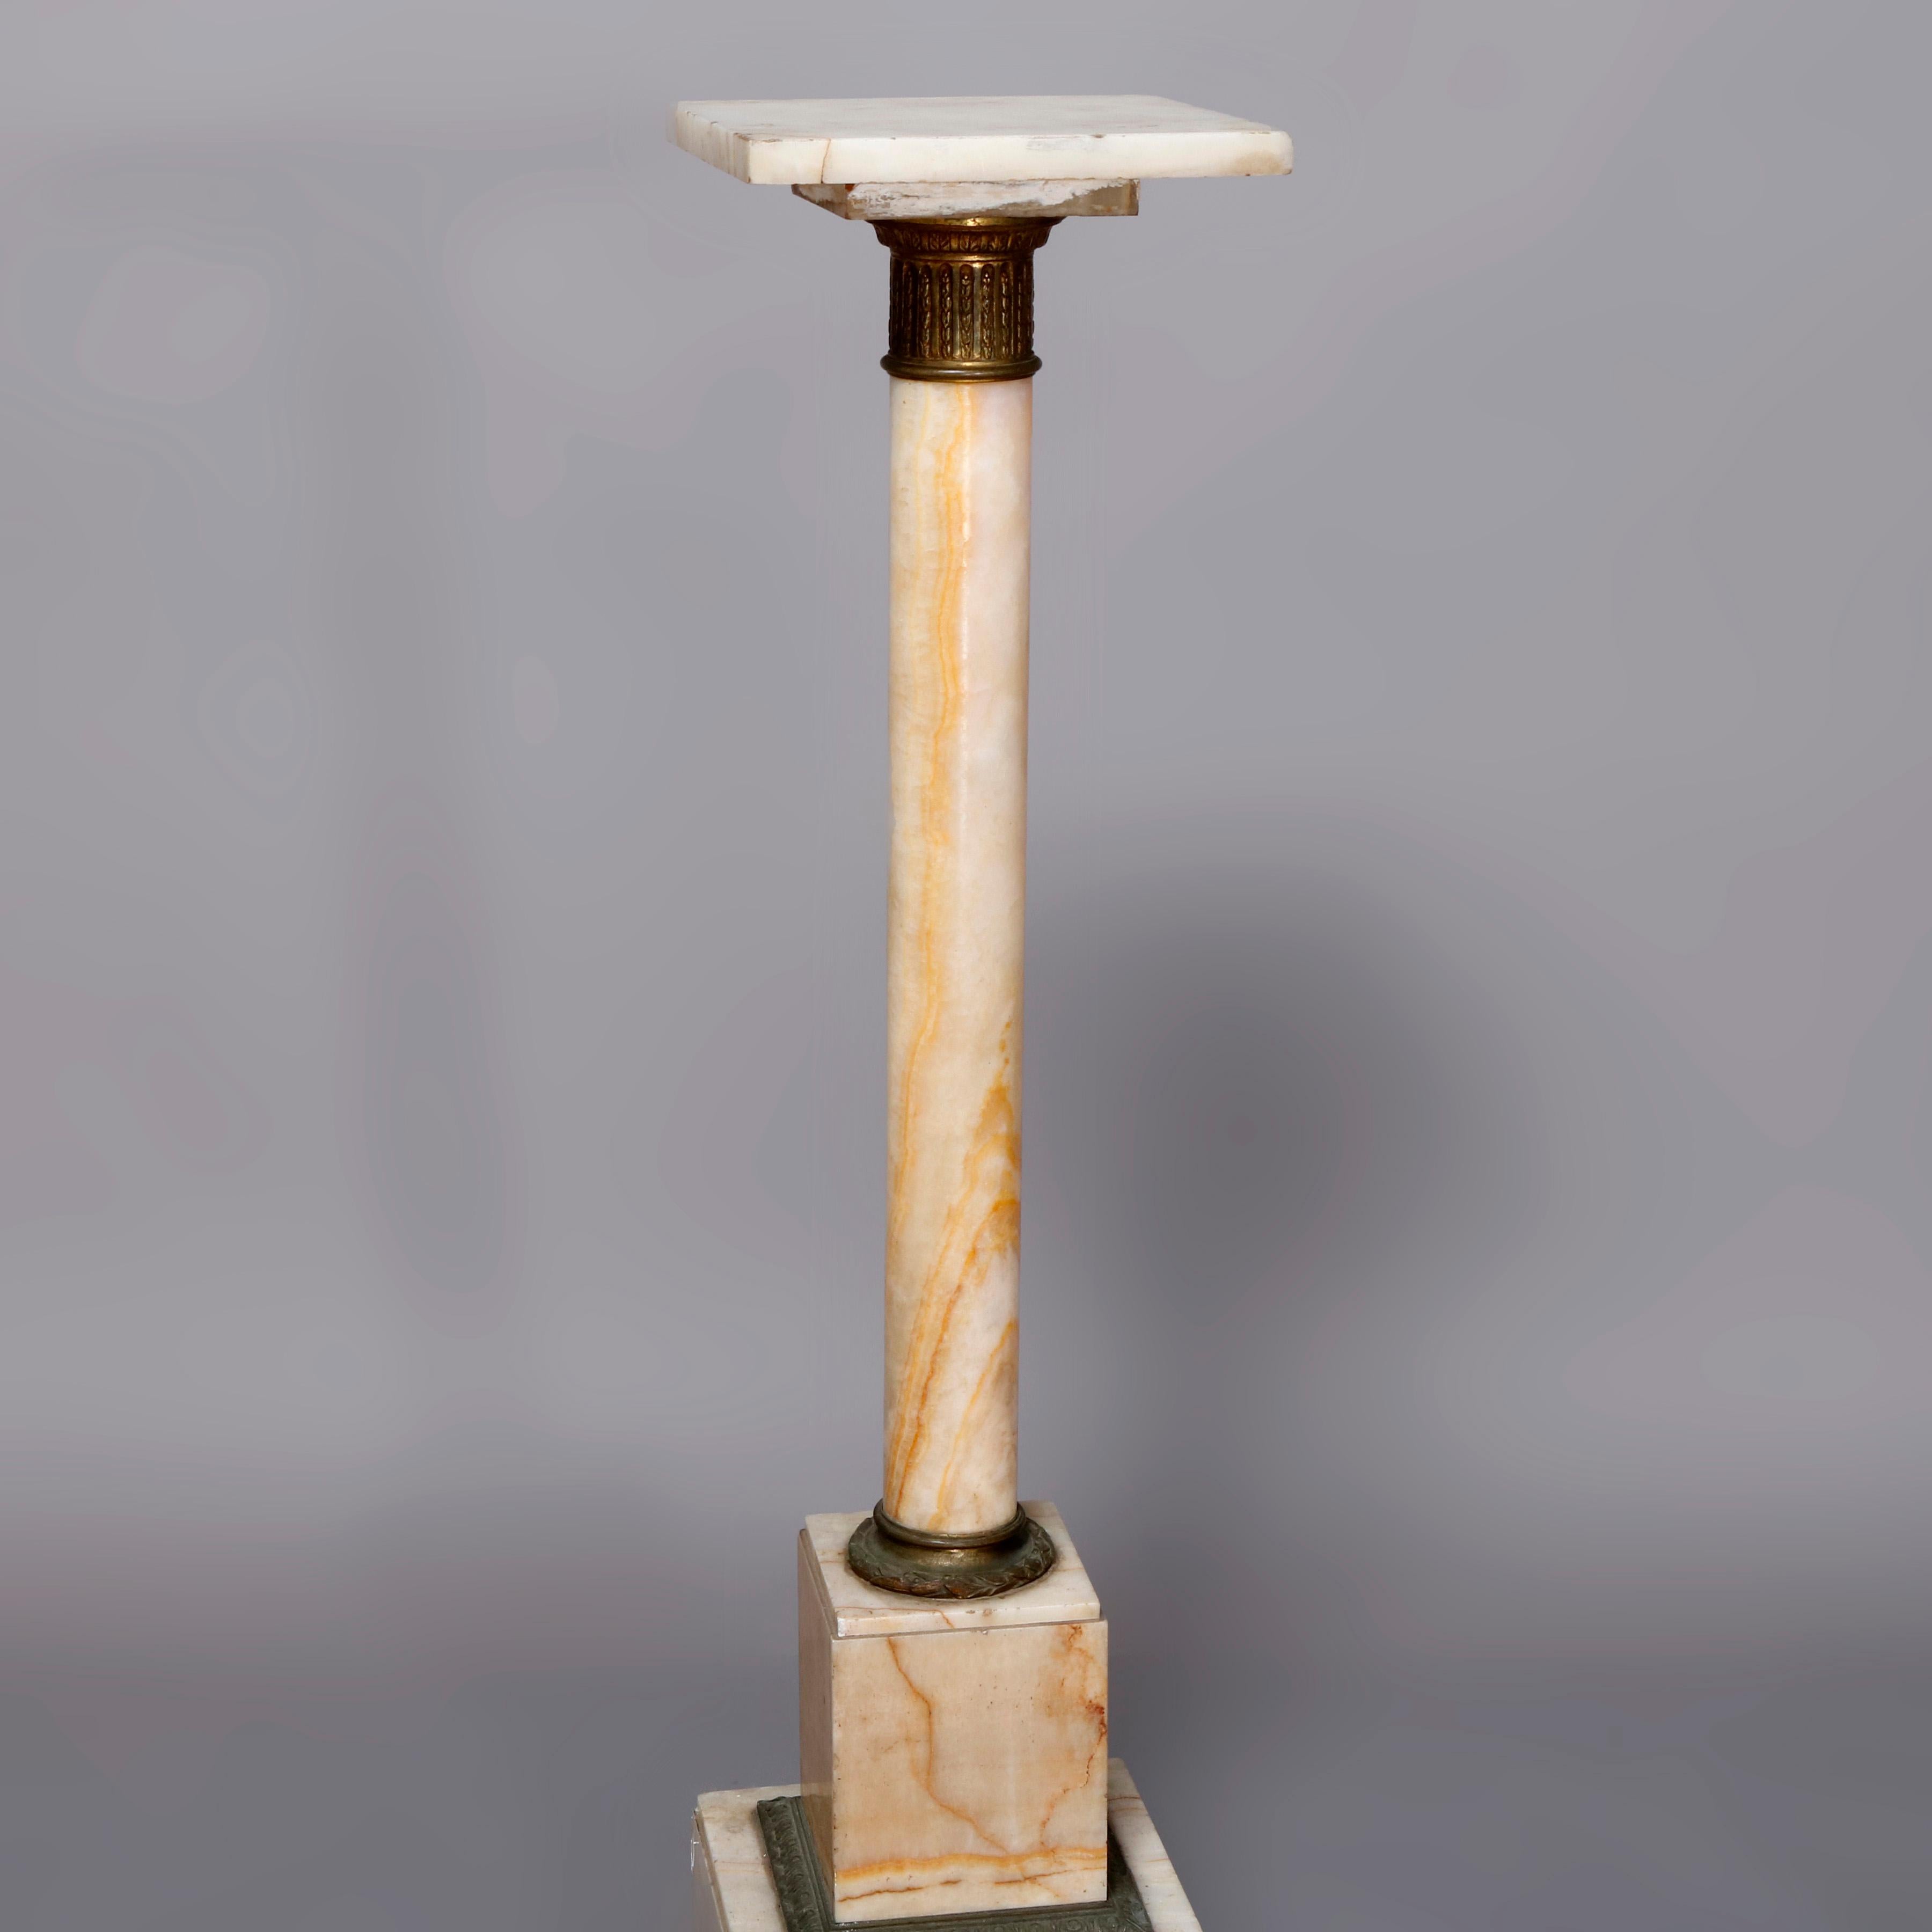 An antique French Classical Corinthian Column display pedestal offers marble construction having footed and stepped base surmounted by round column and square sculpture display with cast bronze mounts, circa 1890.

***DELIVERY NOTICE – Due to